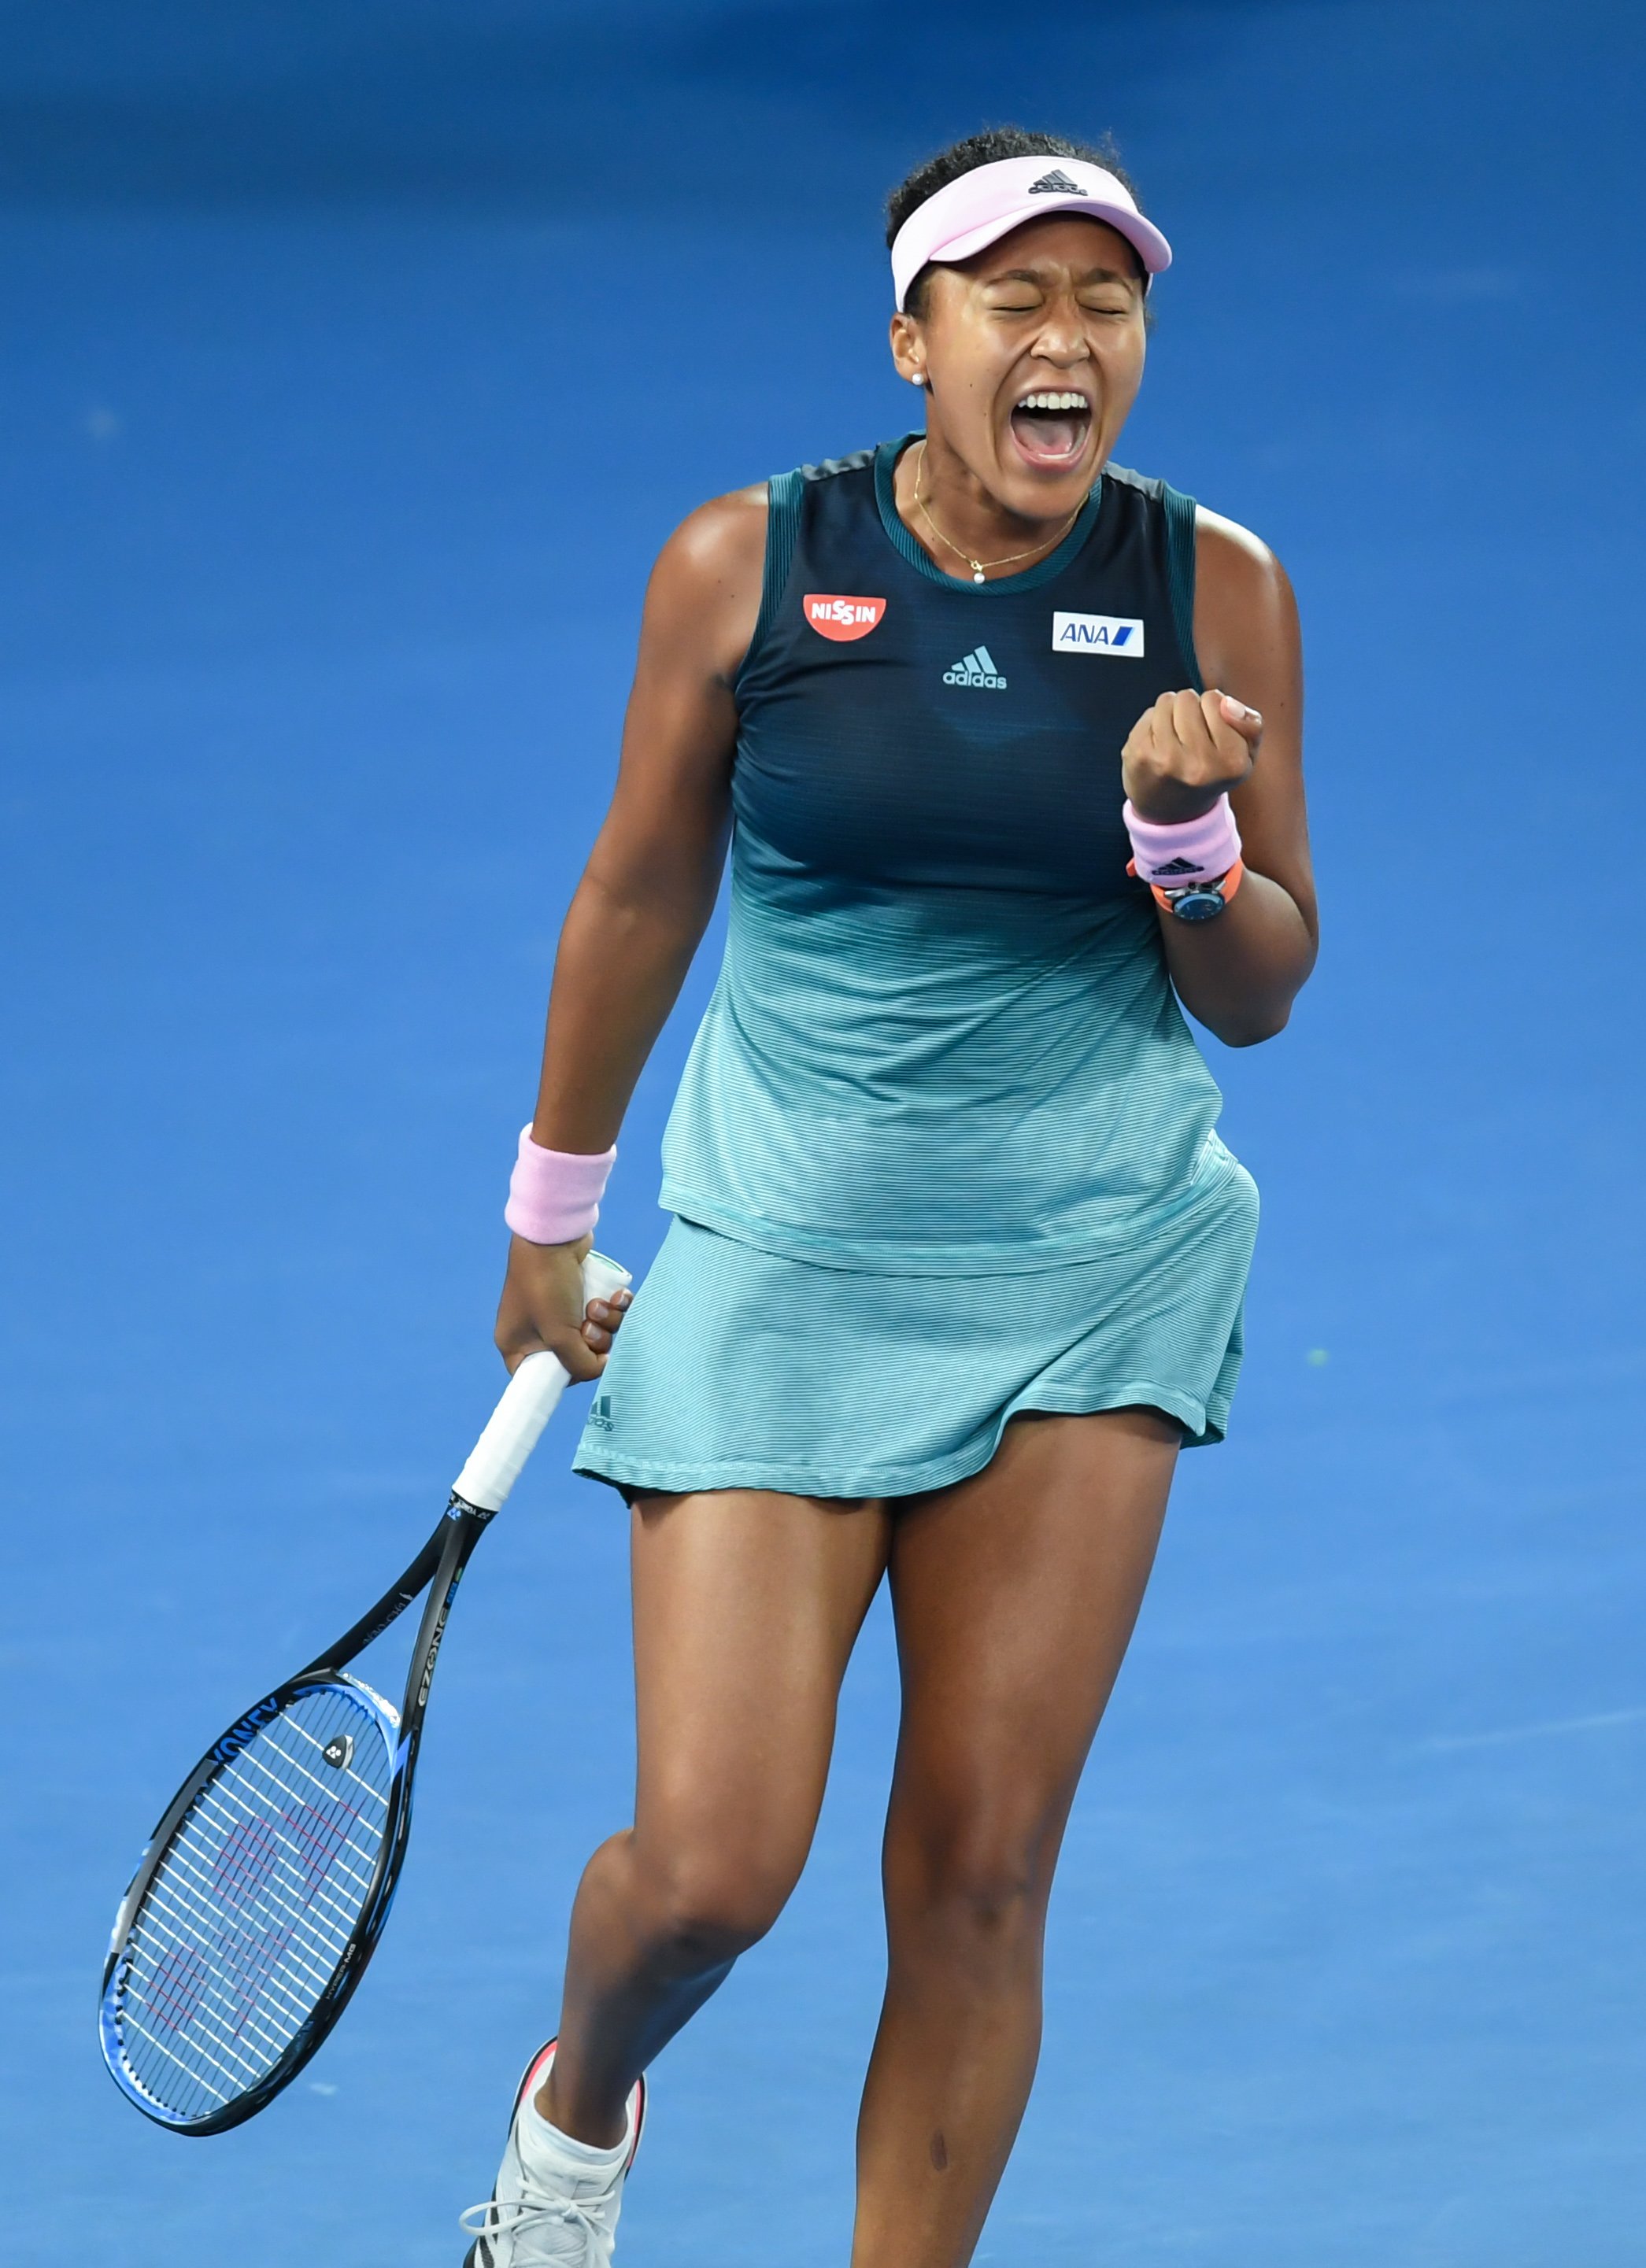 Naomi Osaka screams in delight after hitting a winner during the Women's singles final during day 13 of the 2019 Australian Open at Melbourne Park on January 26, 2019 in Melbourne, Australia | Photo: Getty Images